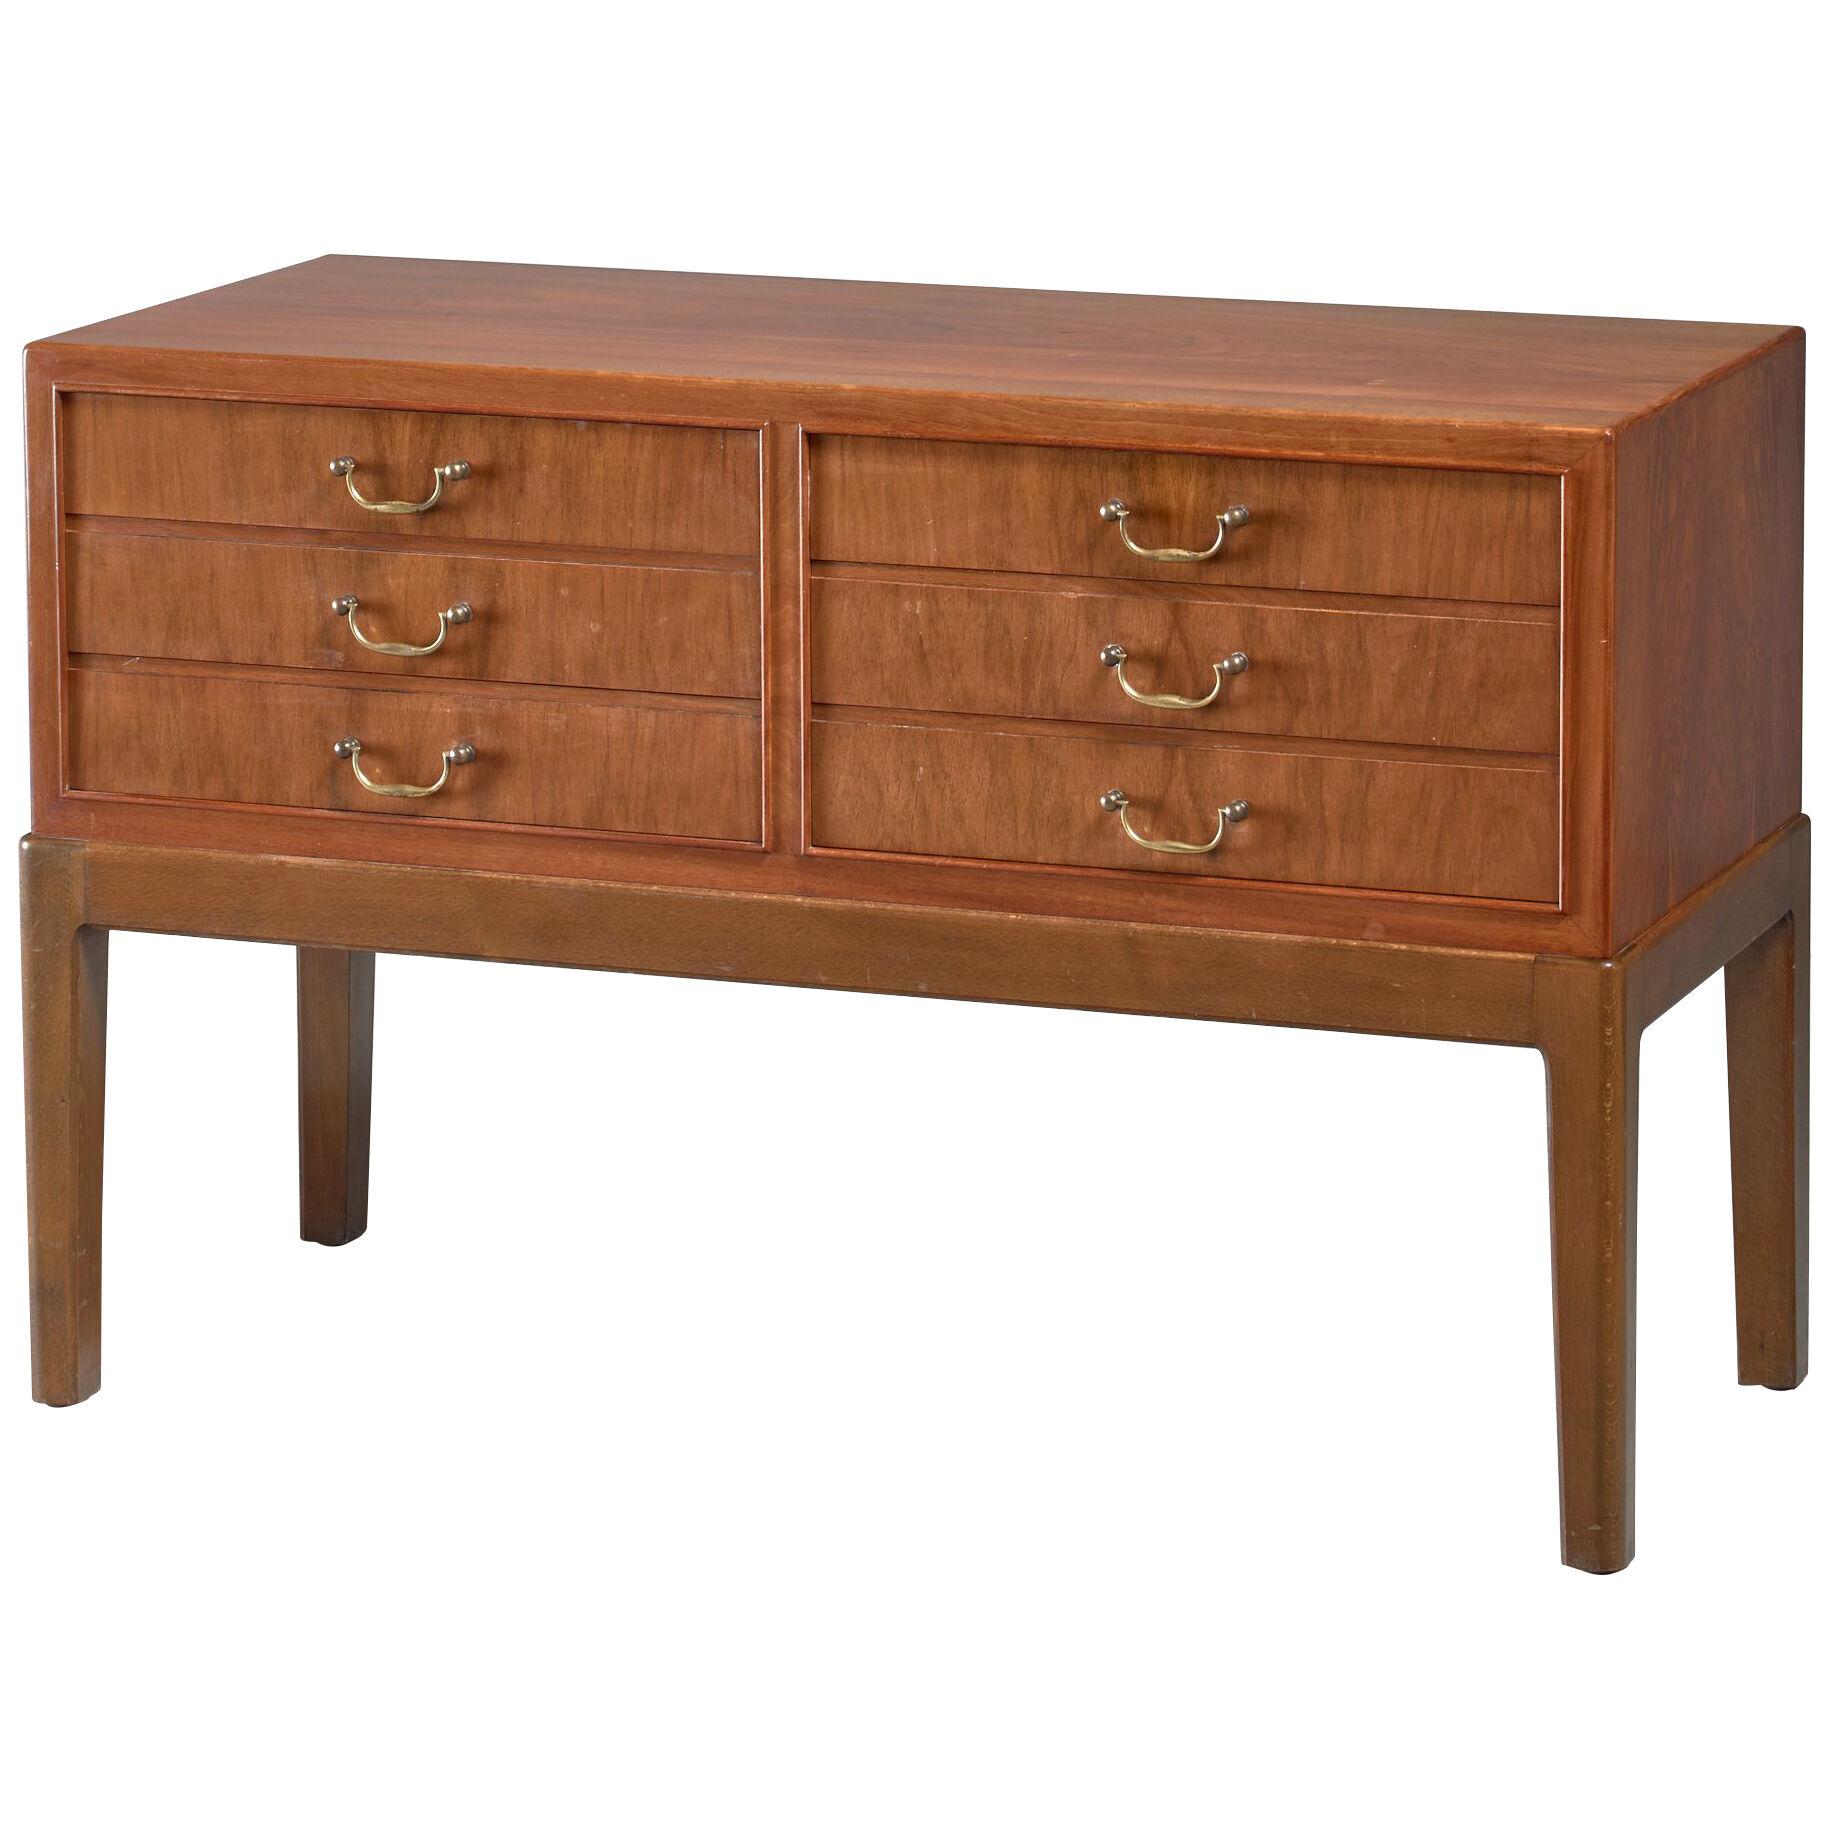 Ole Wanscher Walnut with Brass Double Chest of Drawers, Denmark, 1940s